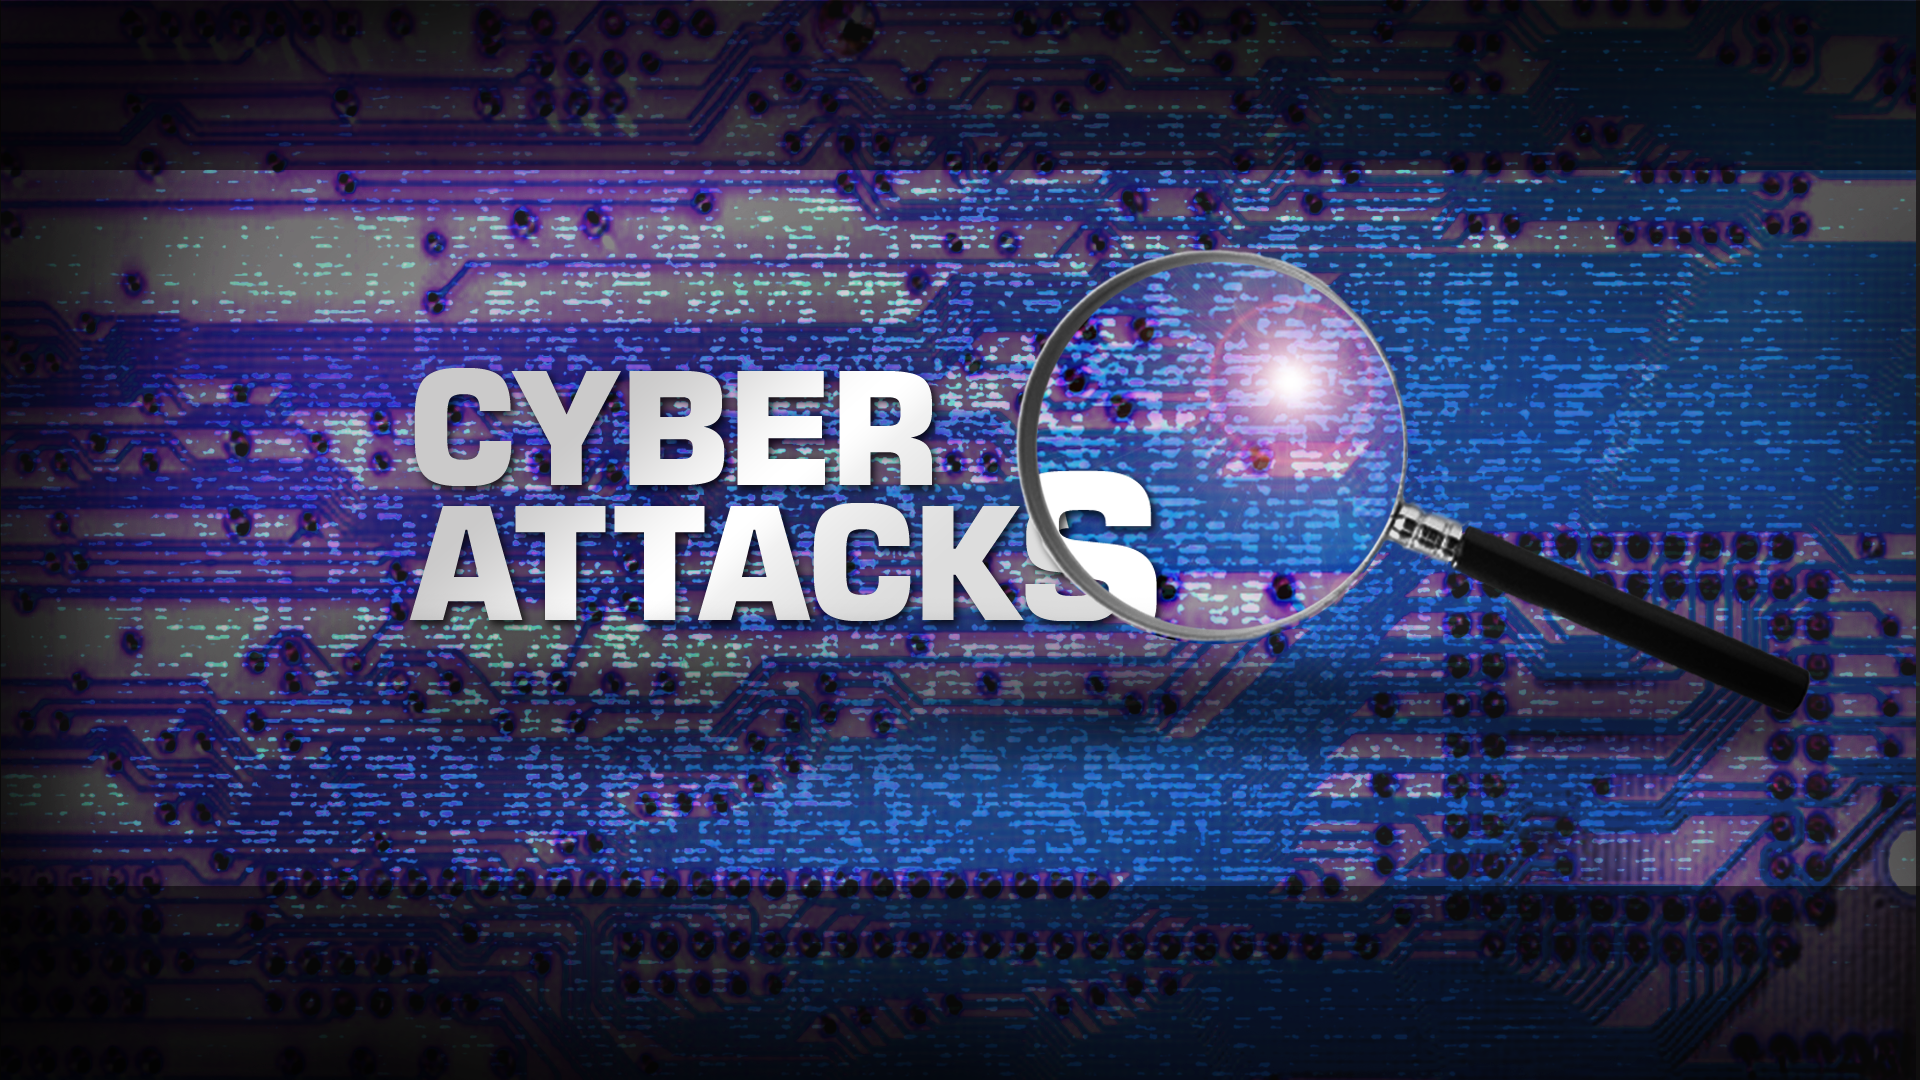 Cyber Attacks: 3 Types Of Threats To Watch Out For in 2021